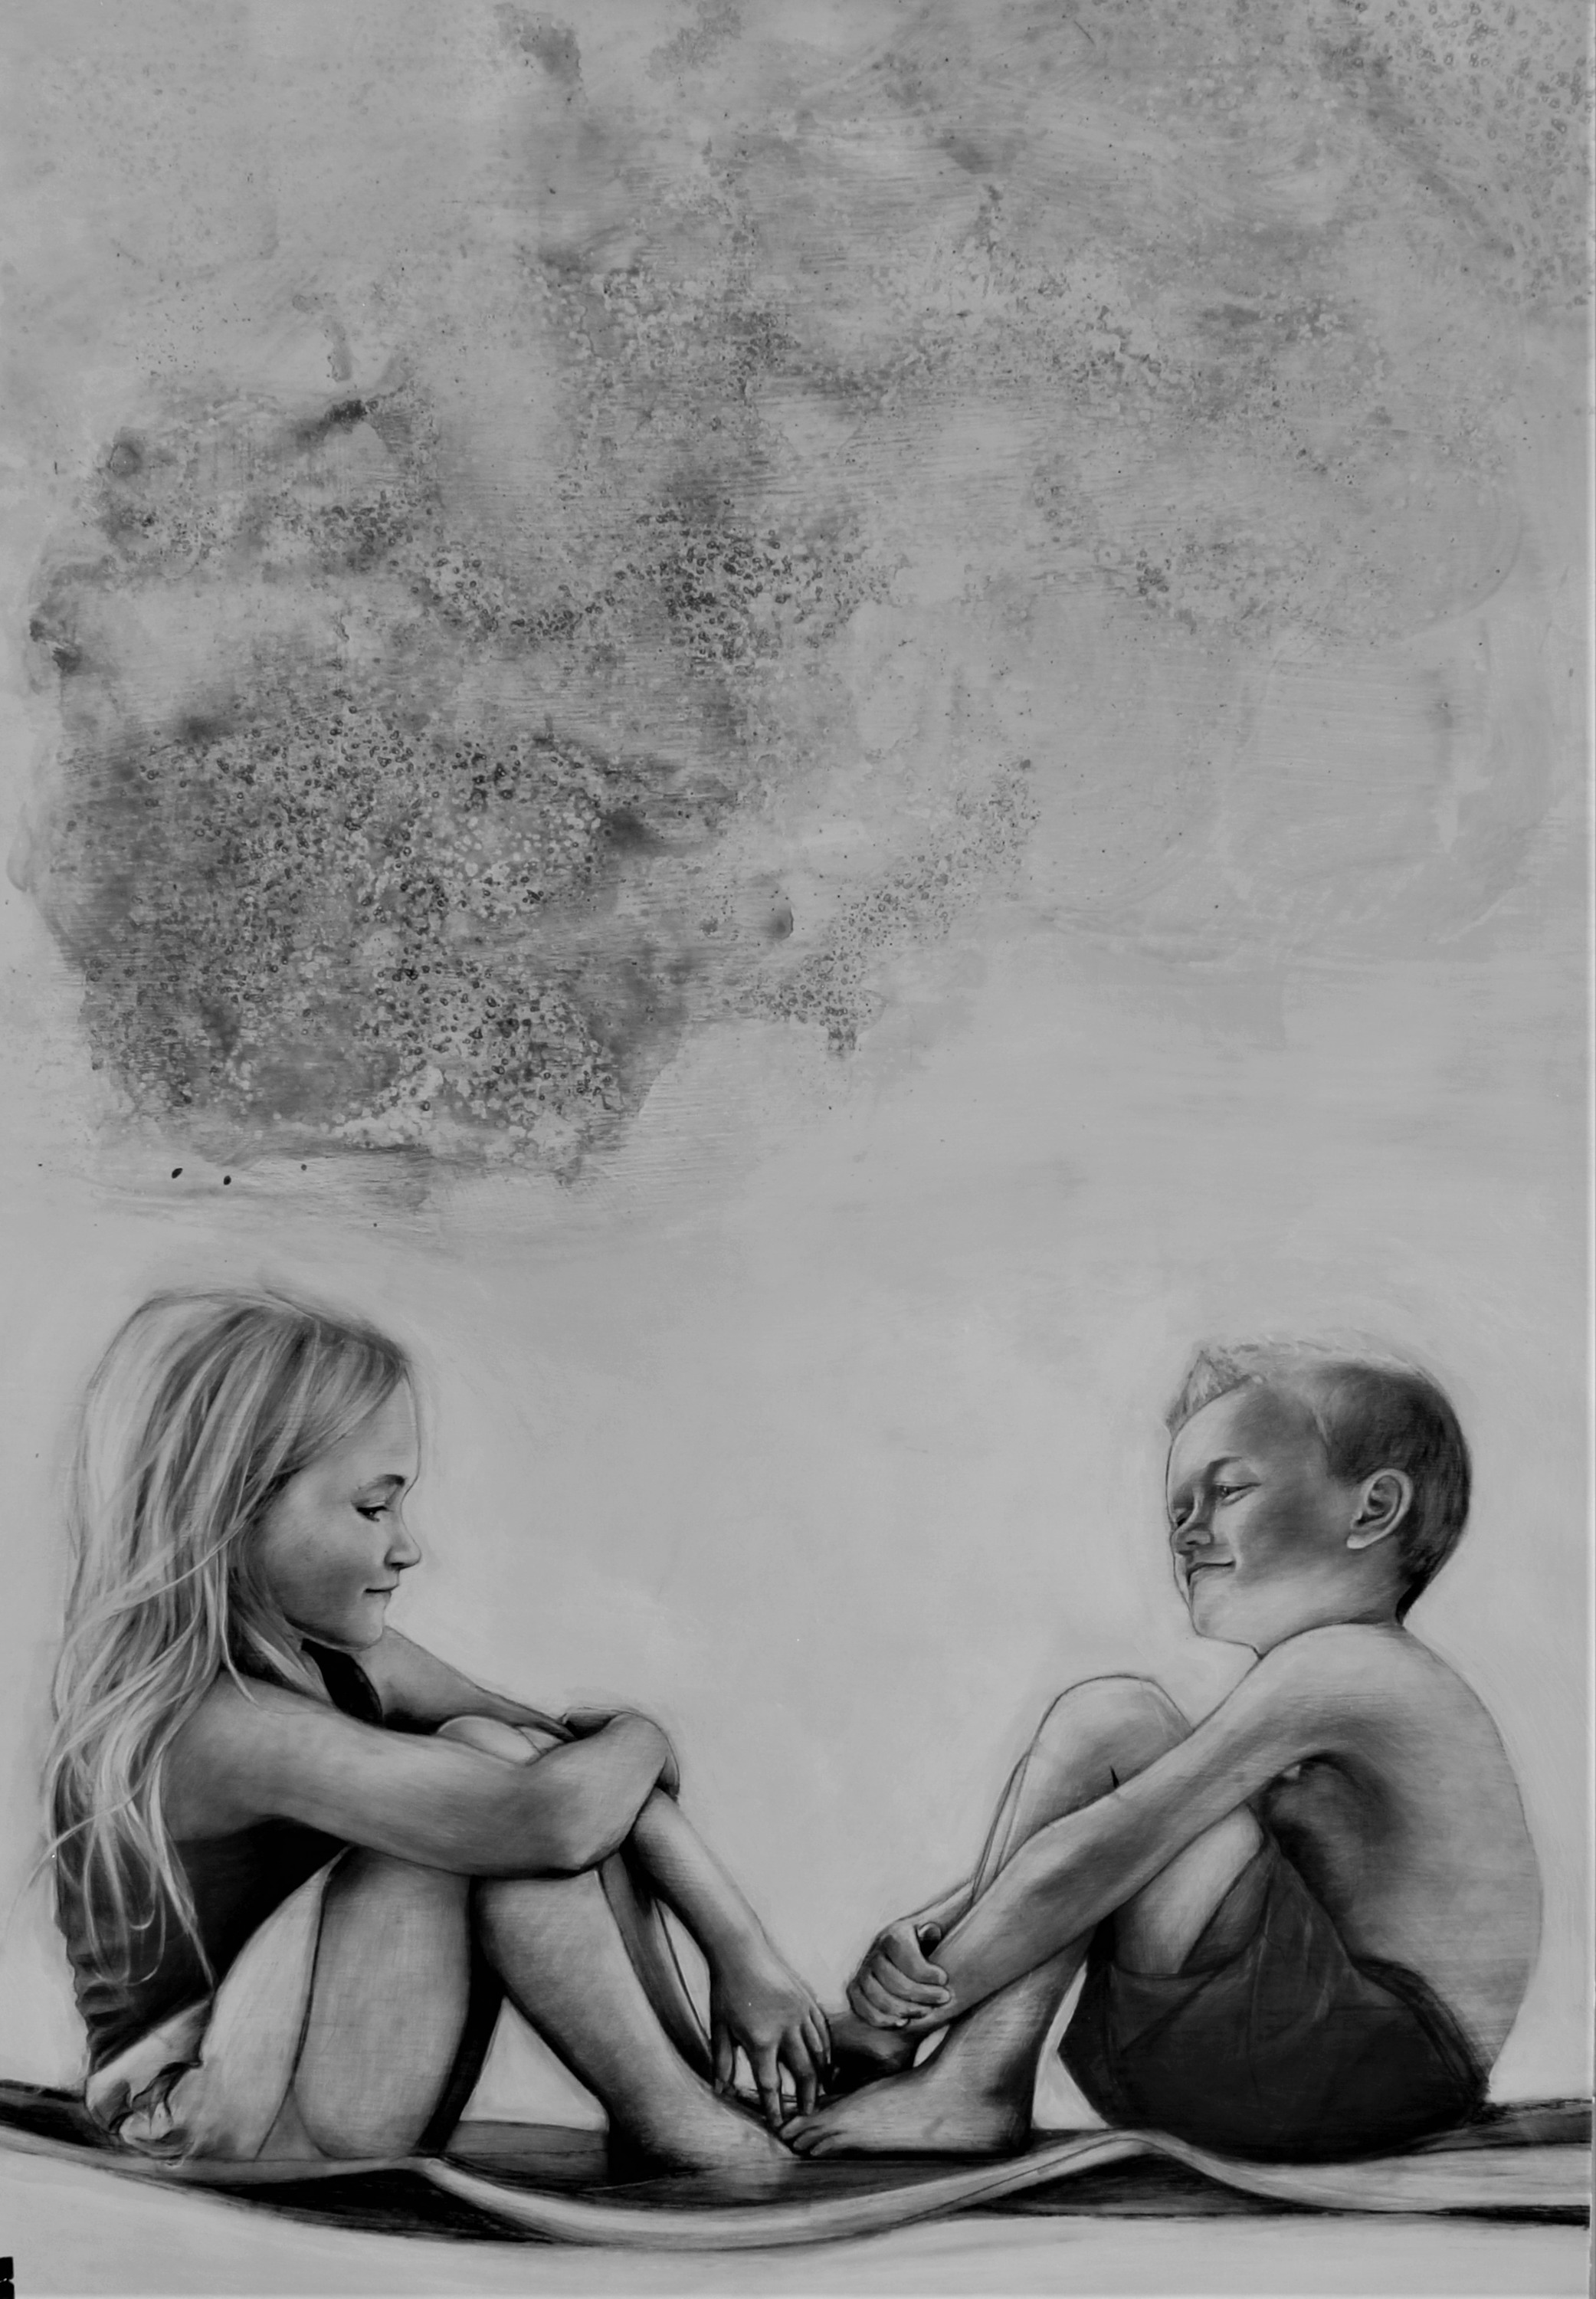 2022 and he loved her mays mayhew graphite gesso paper 24x36 v0hlp2